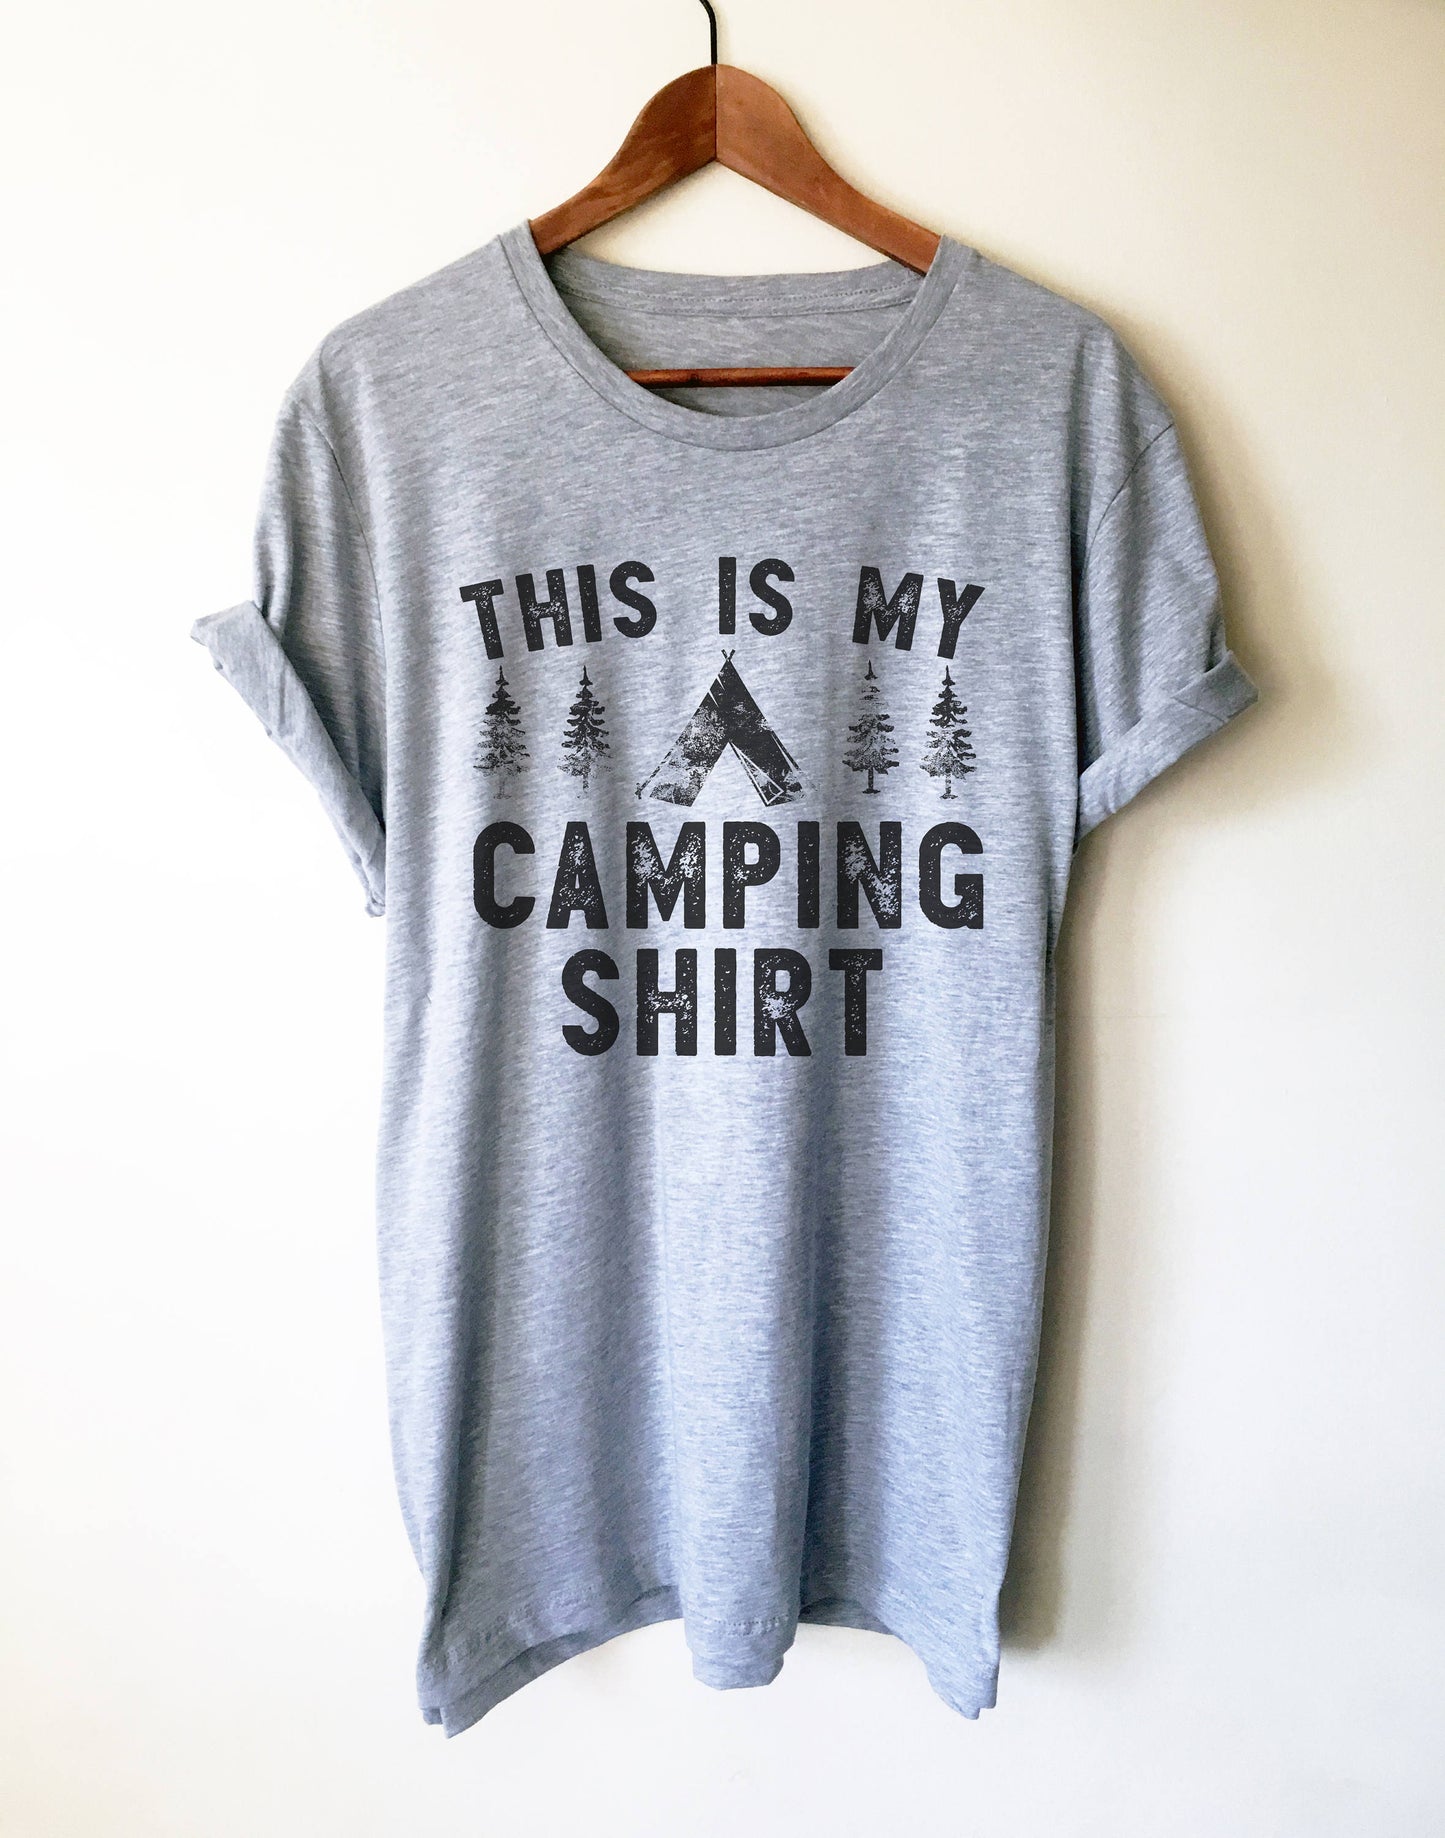 This Is My Camping Shirt Unisex Shirt - Camping shirt, Happy camper shirt, Happy camper, Camping, Hiking shirt, Camping gift, Camp shirt